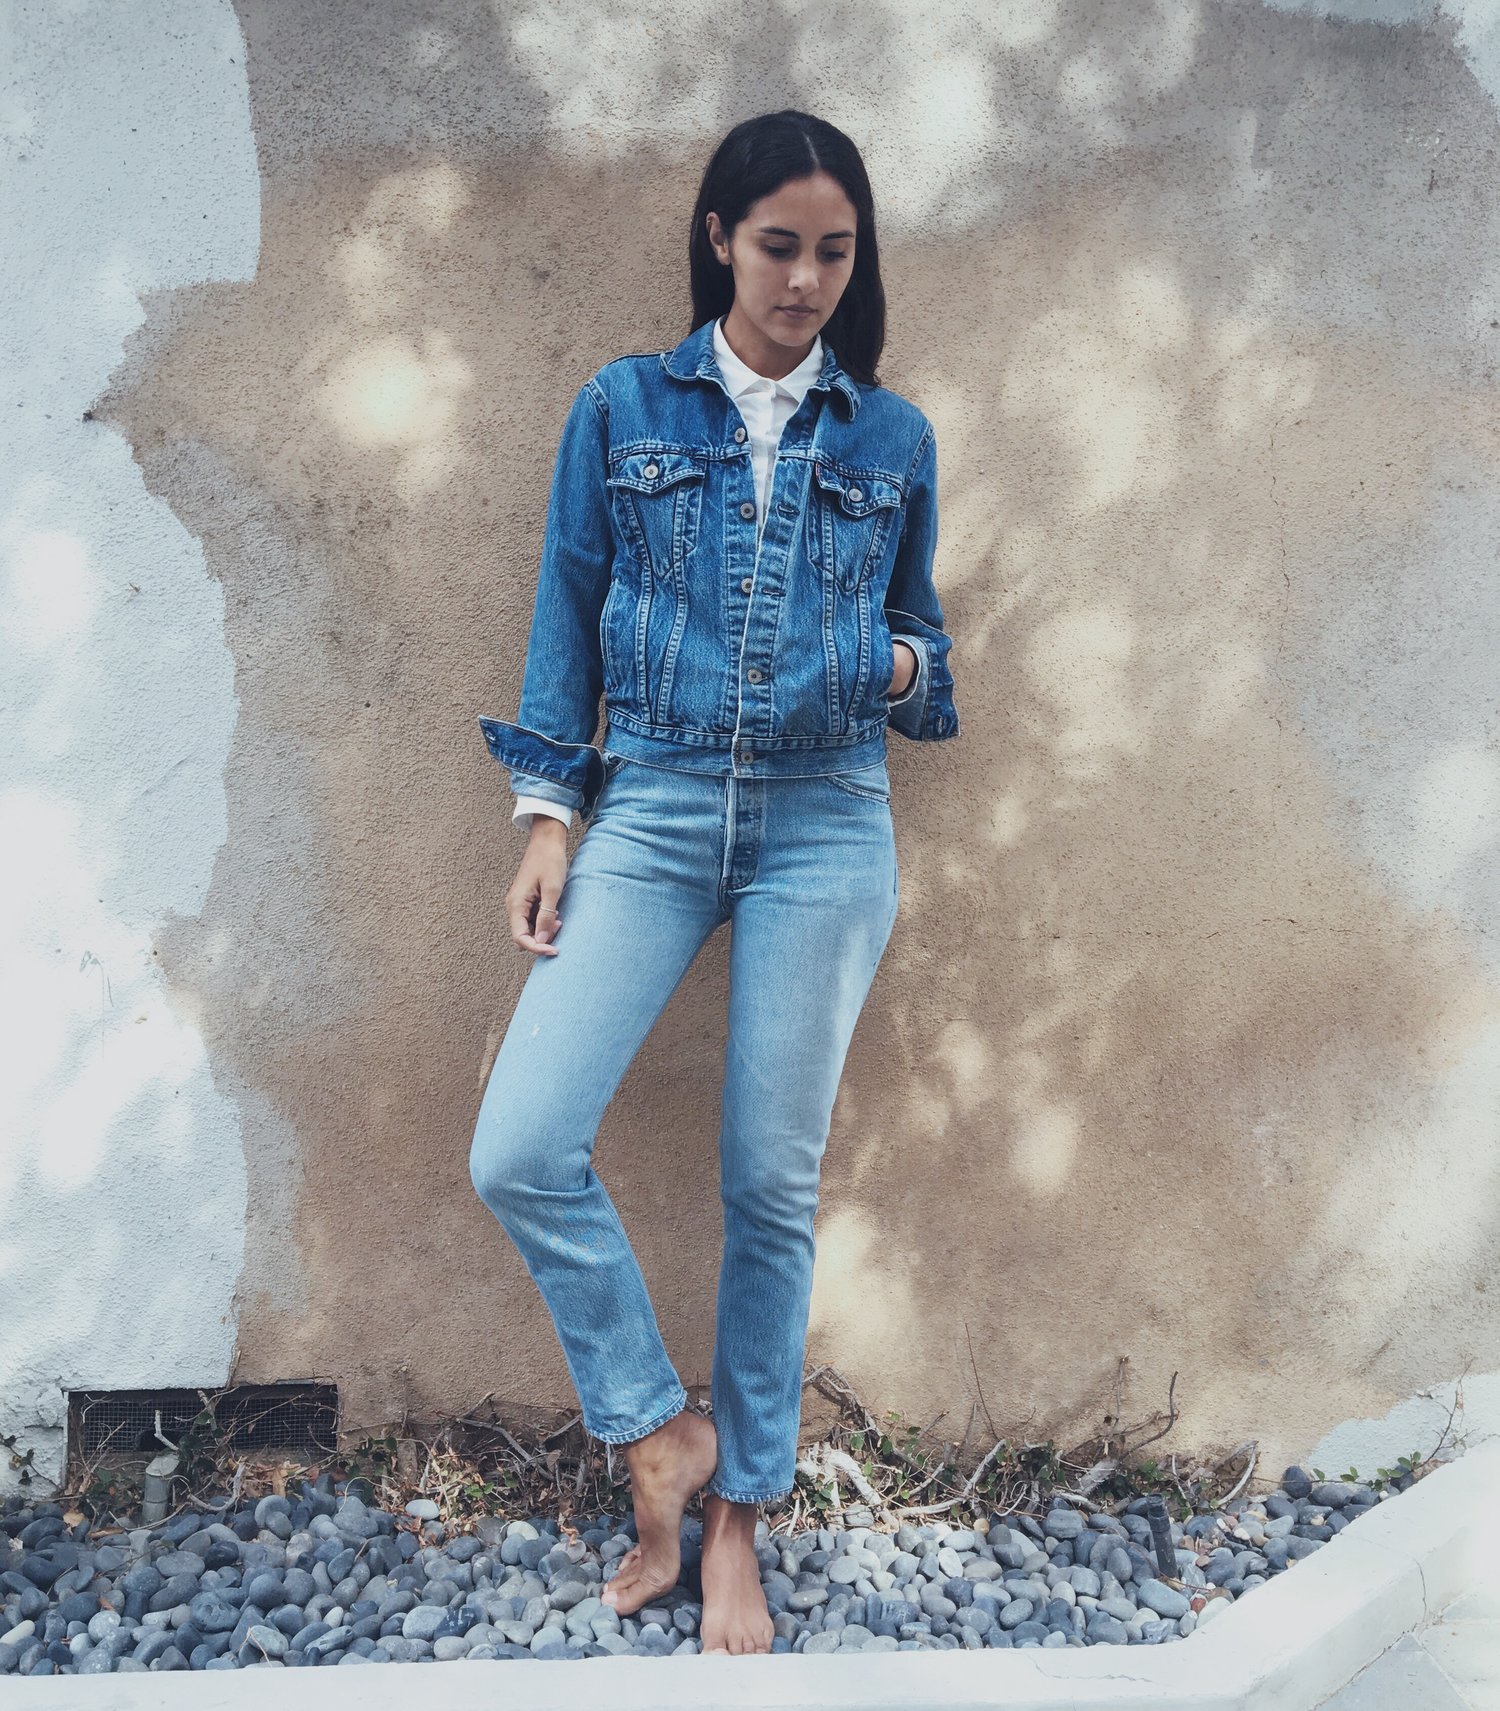 Blue jean, baby queen — These Native Goods